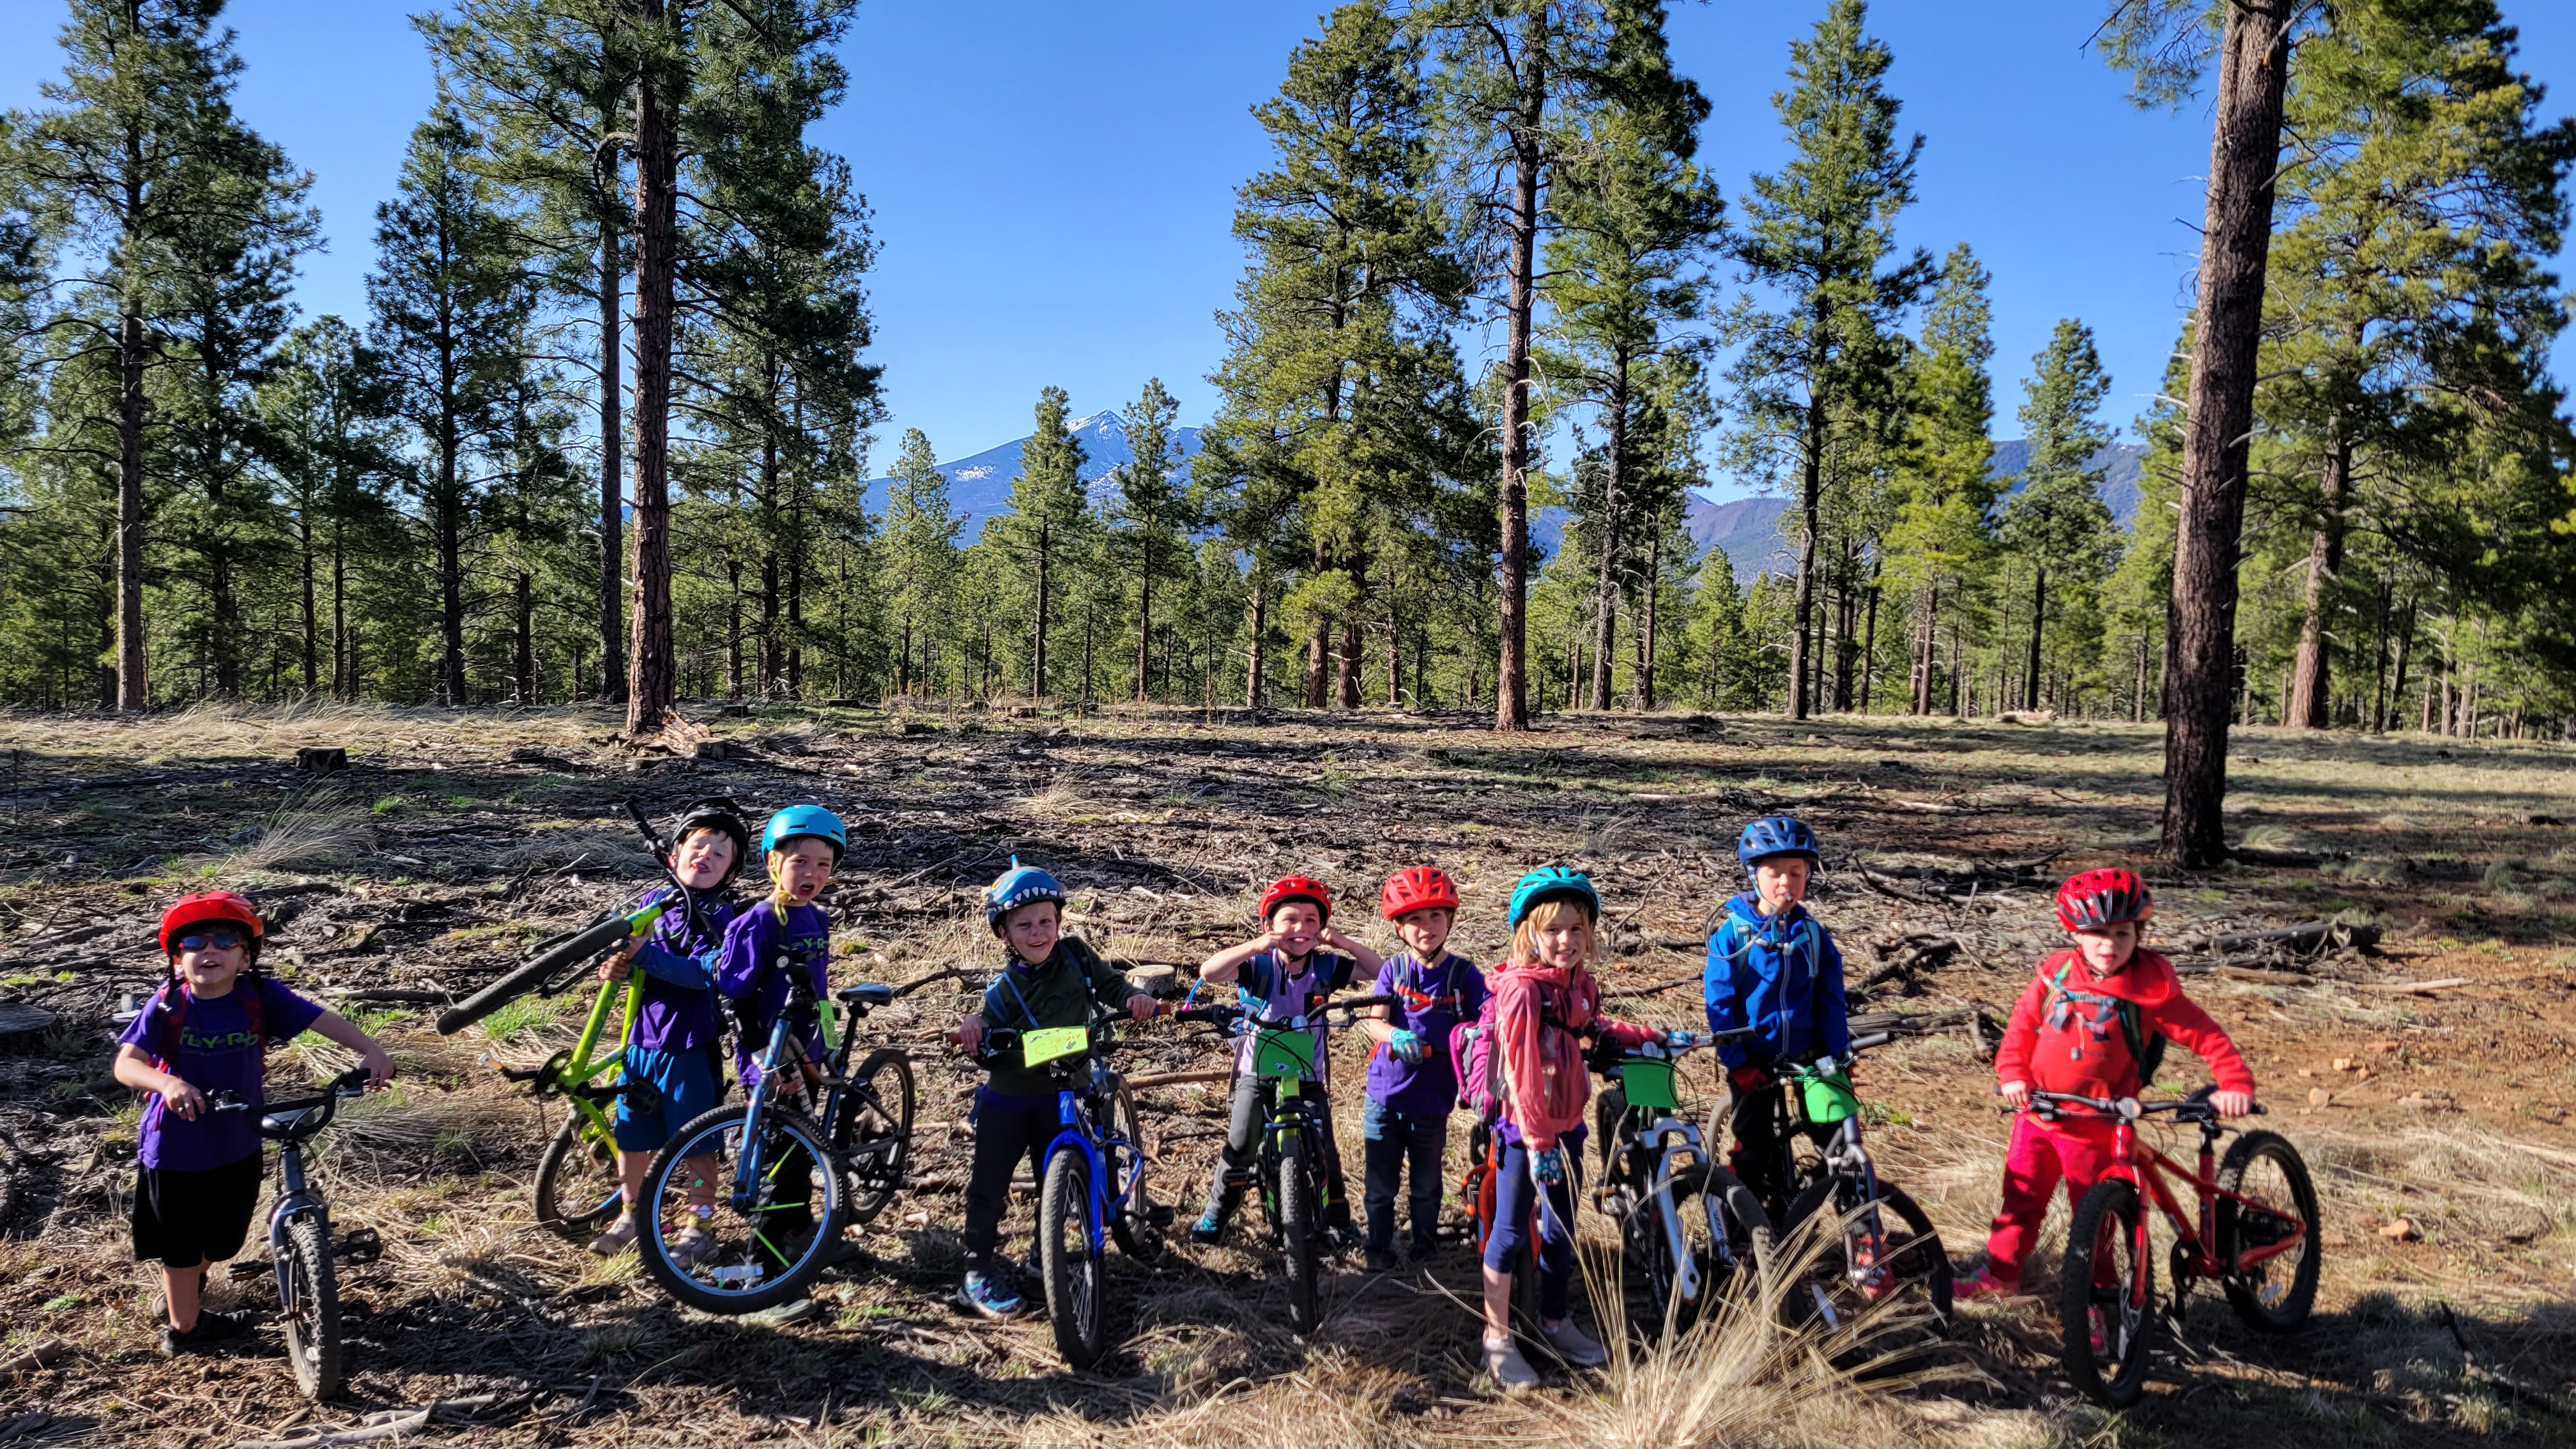 Children involved in a bike program funded through a Heritage Grant ride through Flagstaff